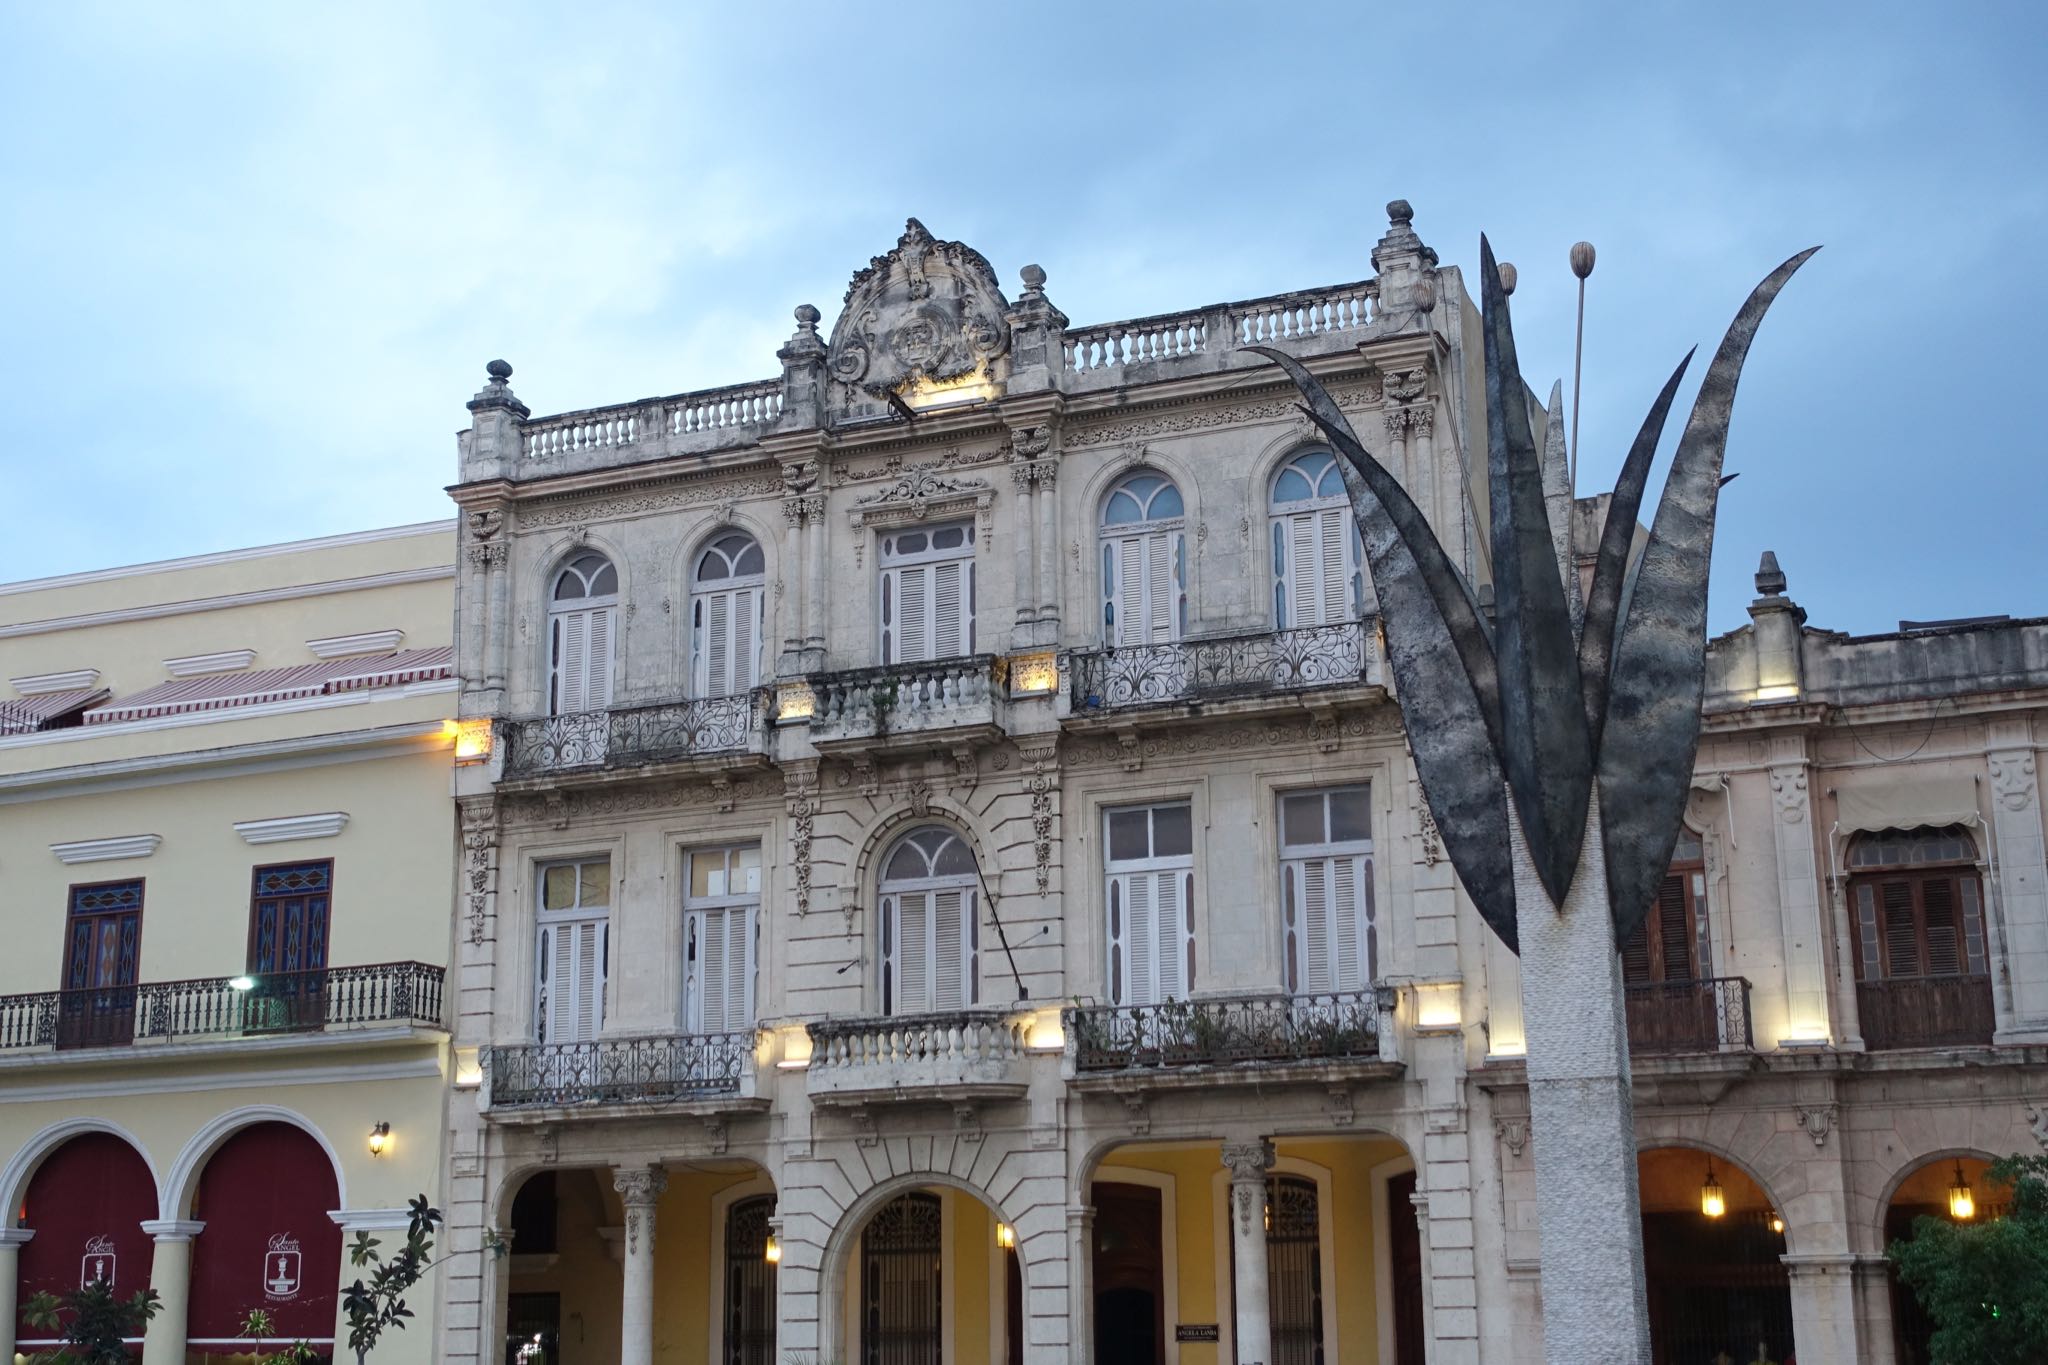 Photo 131 of 221 from the album Highlights Cuba 2019.